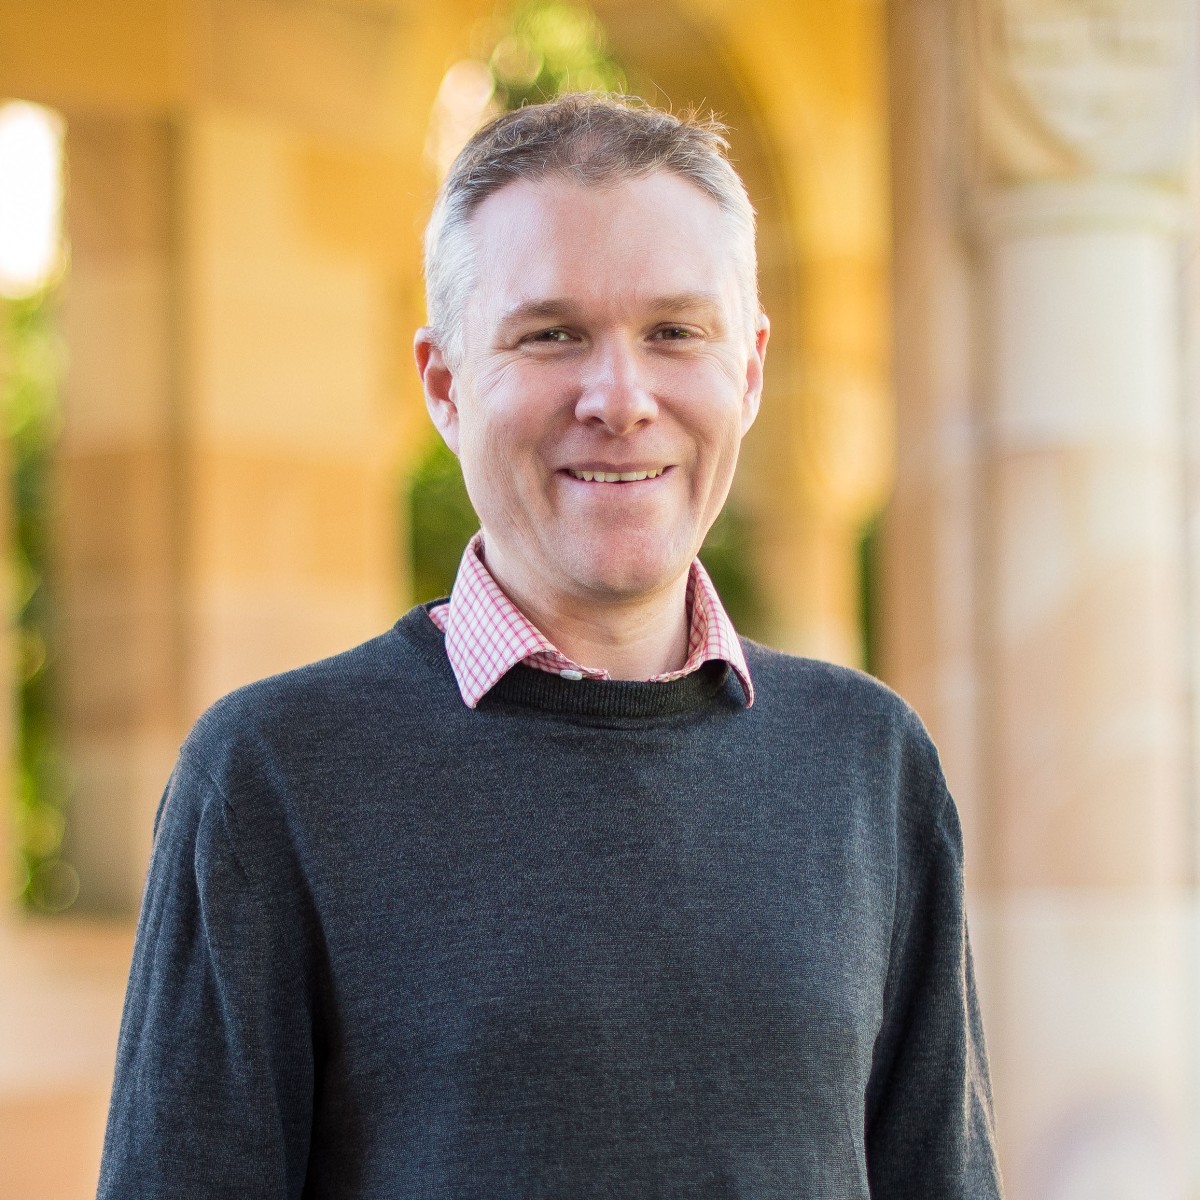 👏 Congratulations to Dr Stuart Middleton for receiving the Management and Organization Behavior Teaching Society (#MOBTS) Mid-Career Distinguished Educator Award for his innovative teaching, leadership and intellectual contributions to the field of management education. @OBTS1